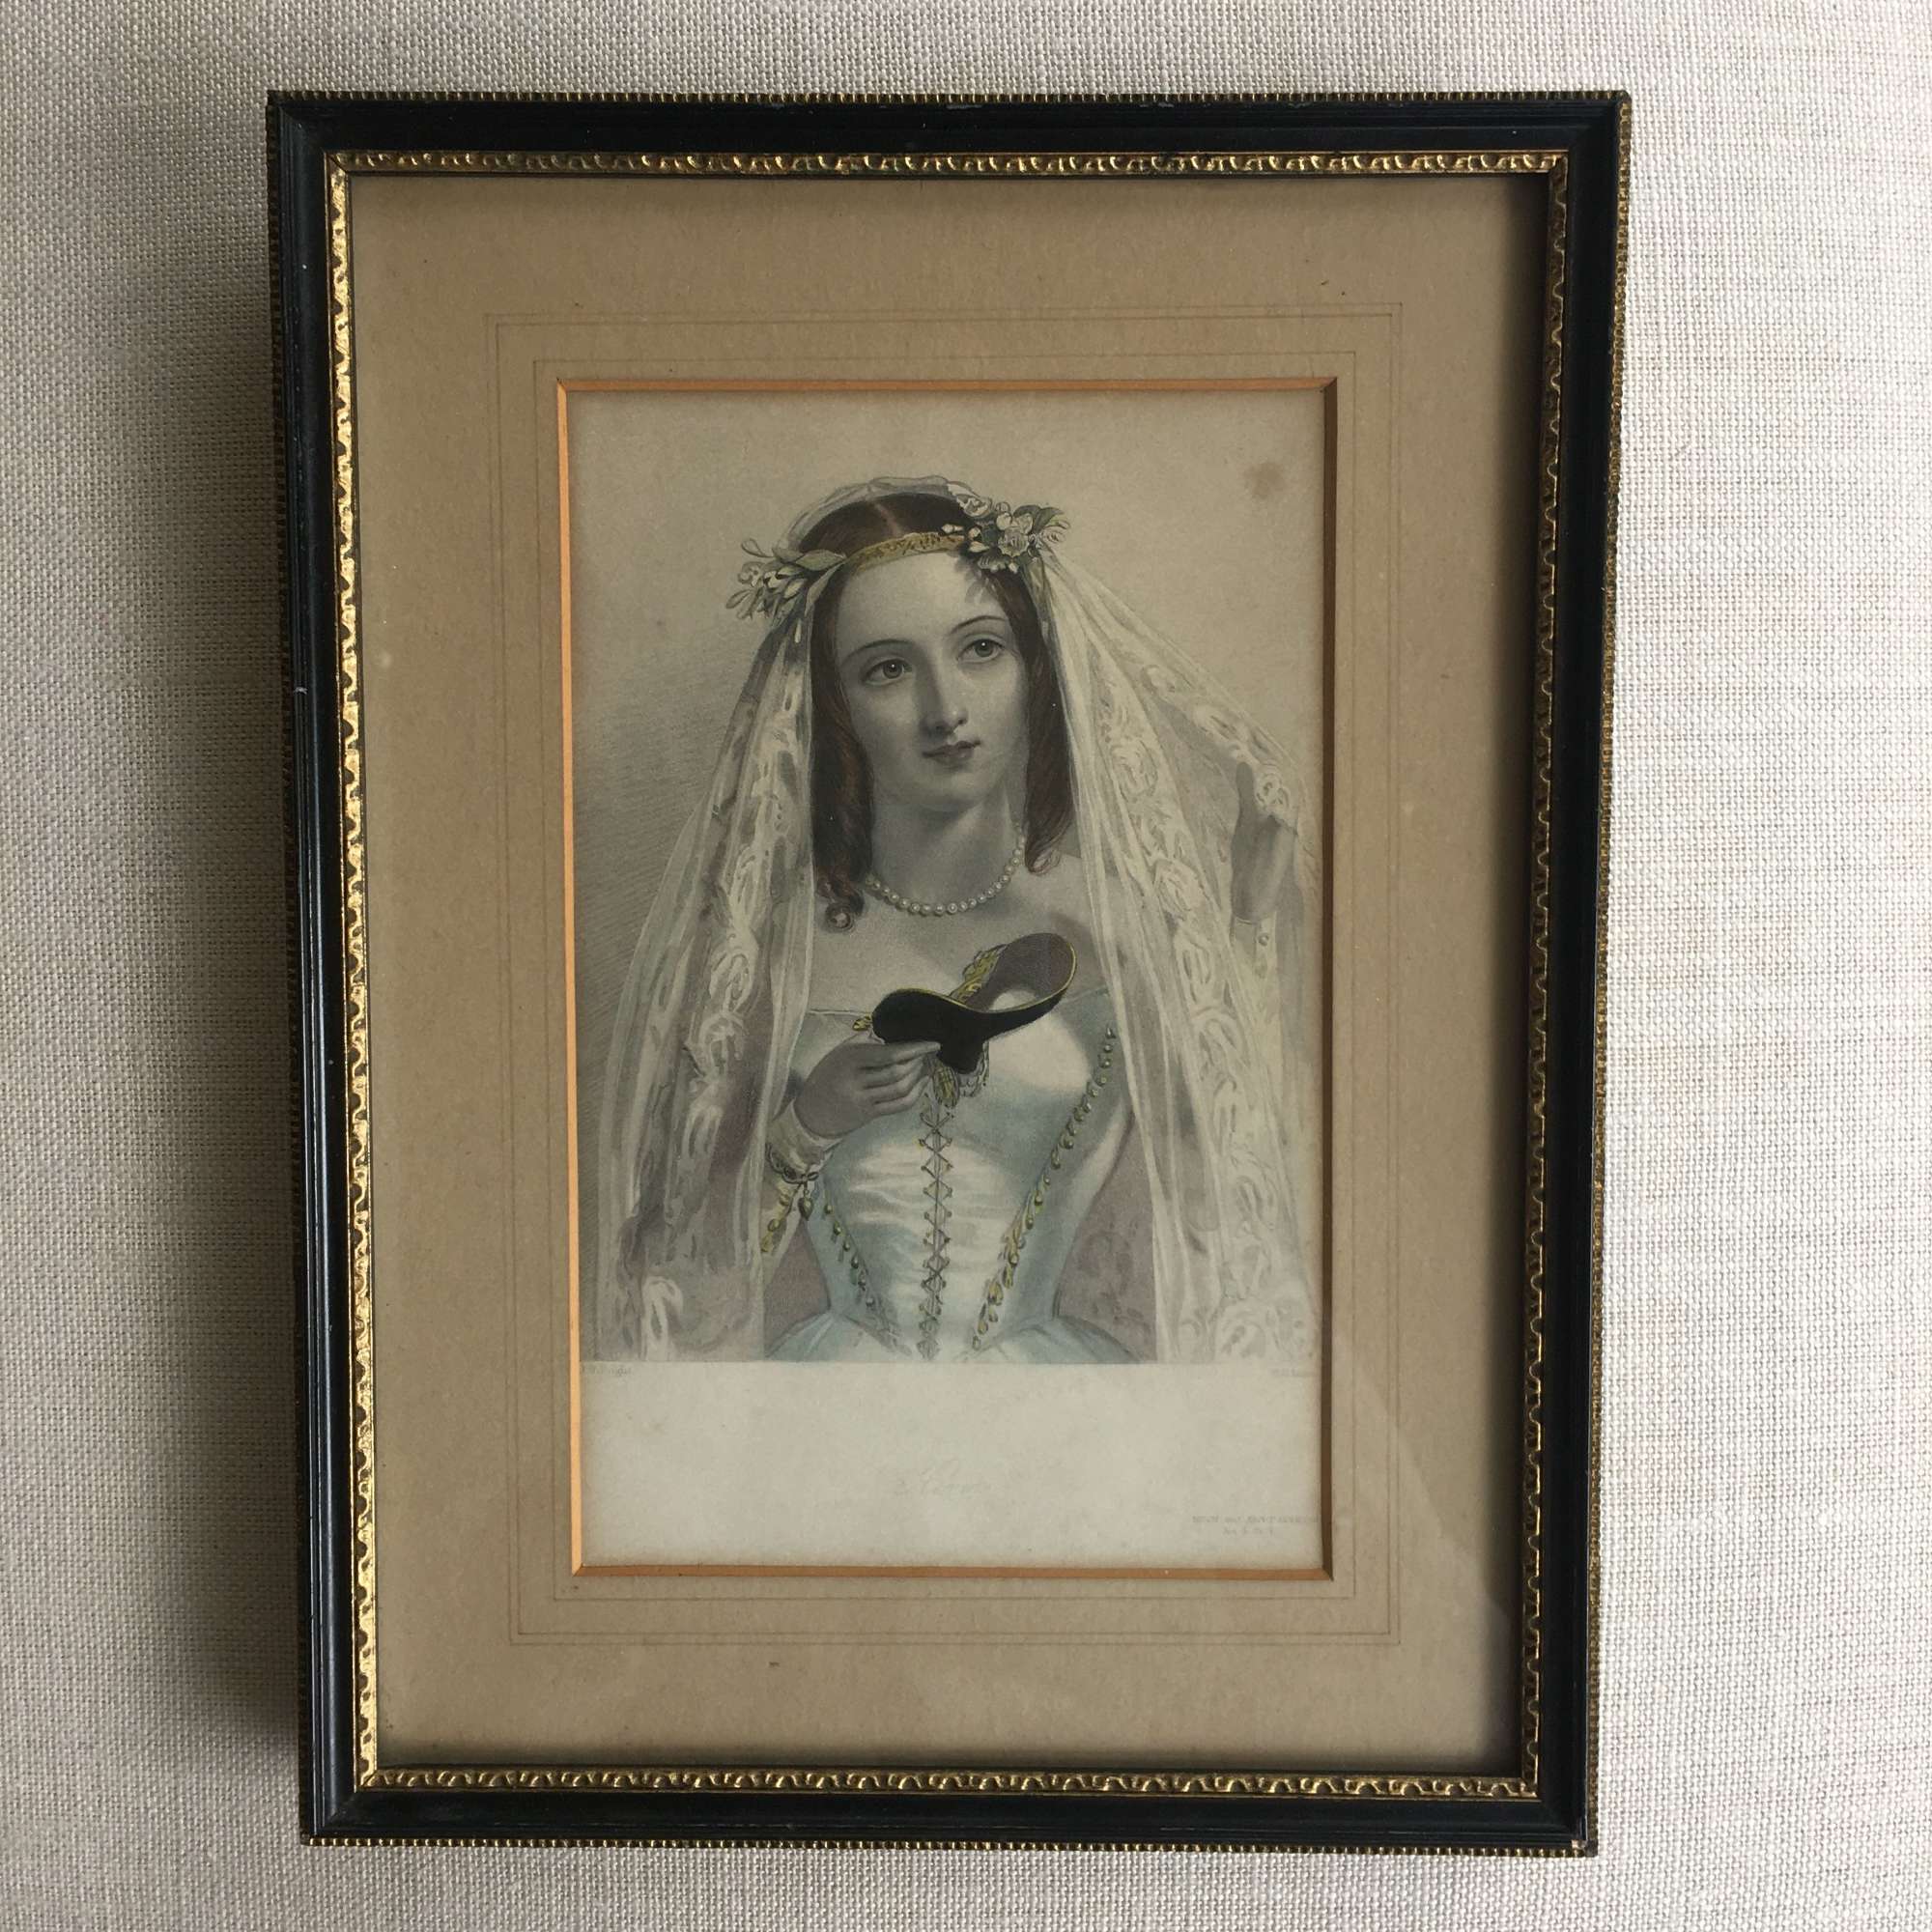 Framed antique print of Hero (Much ado about nothing), original frame